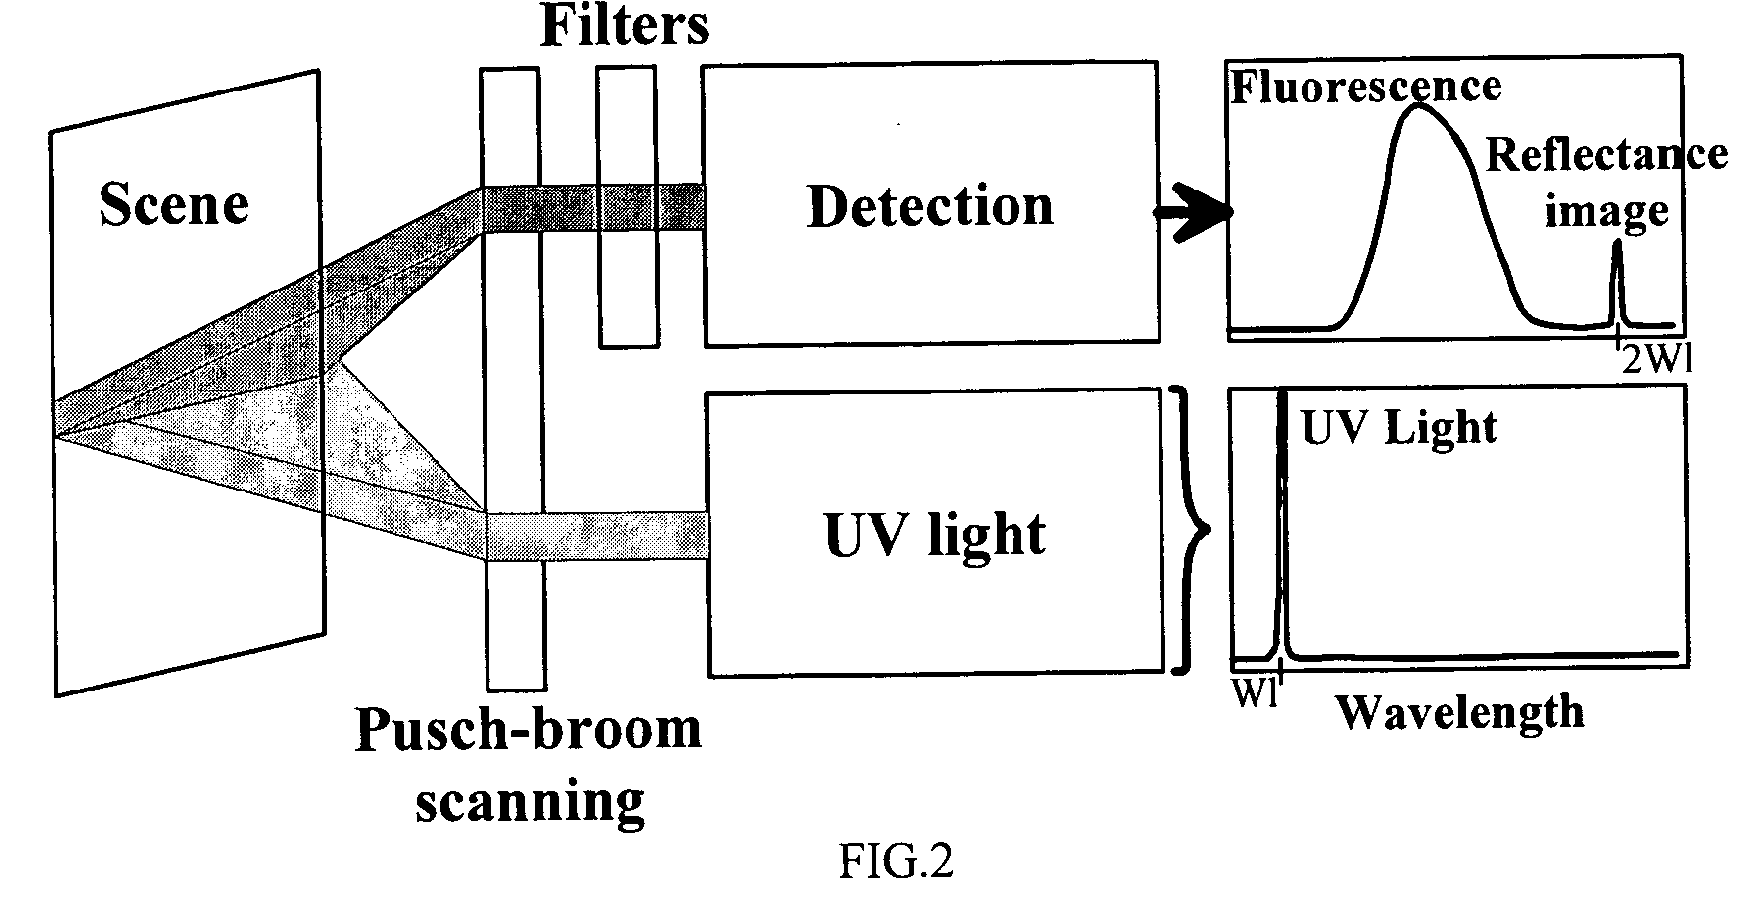 Systems and methods for registering reflectance and fluorescence hyperspectral imagery